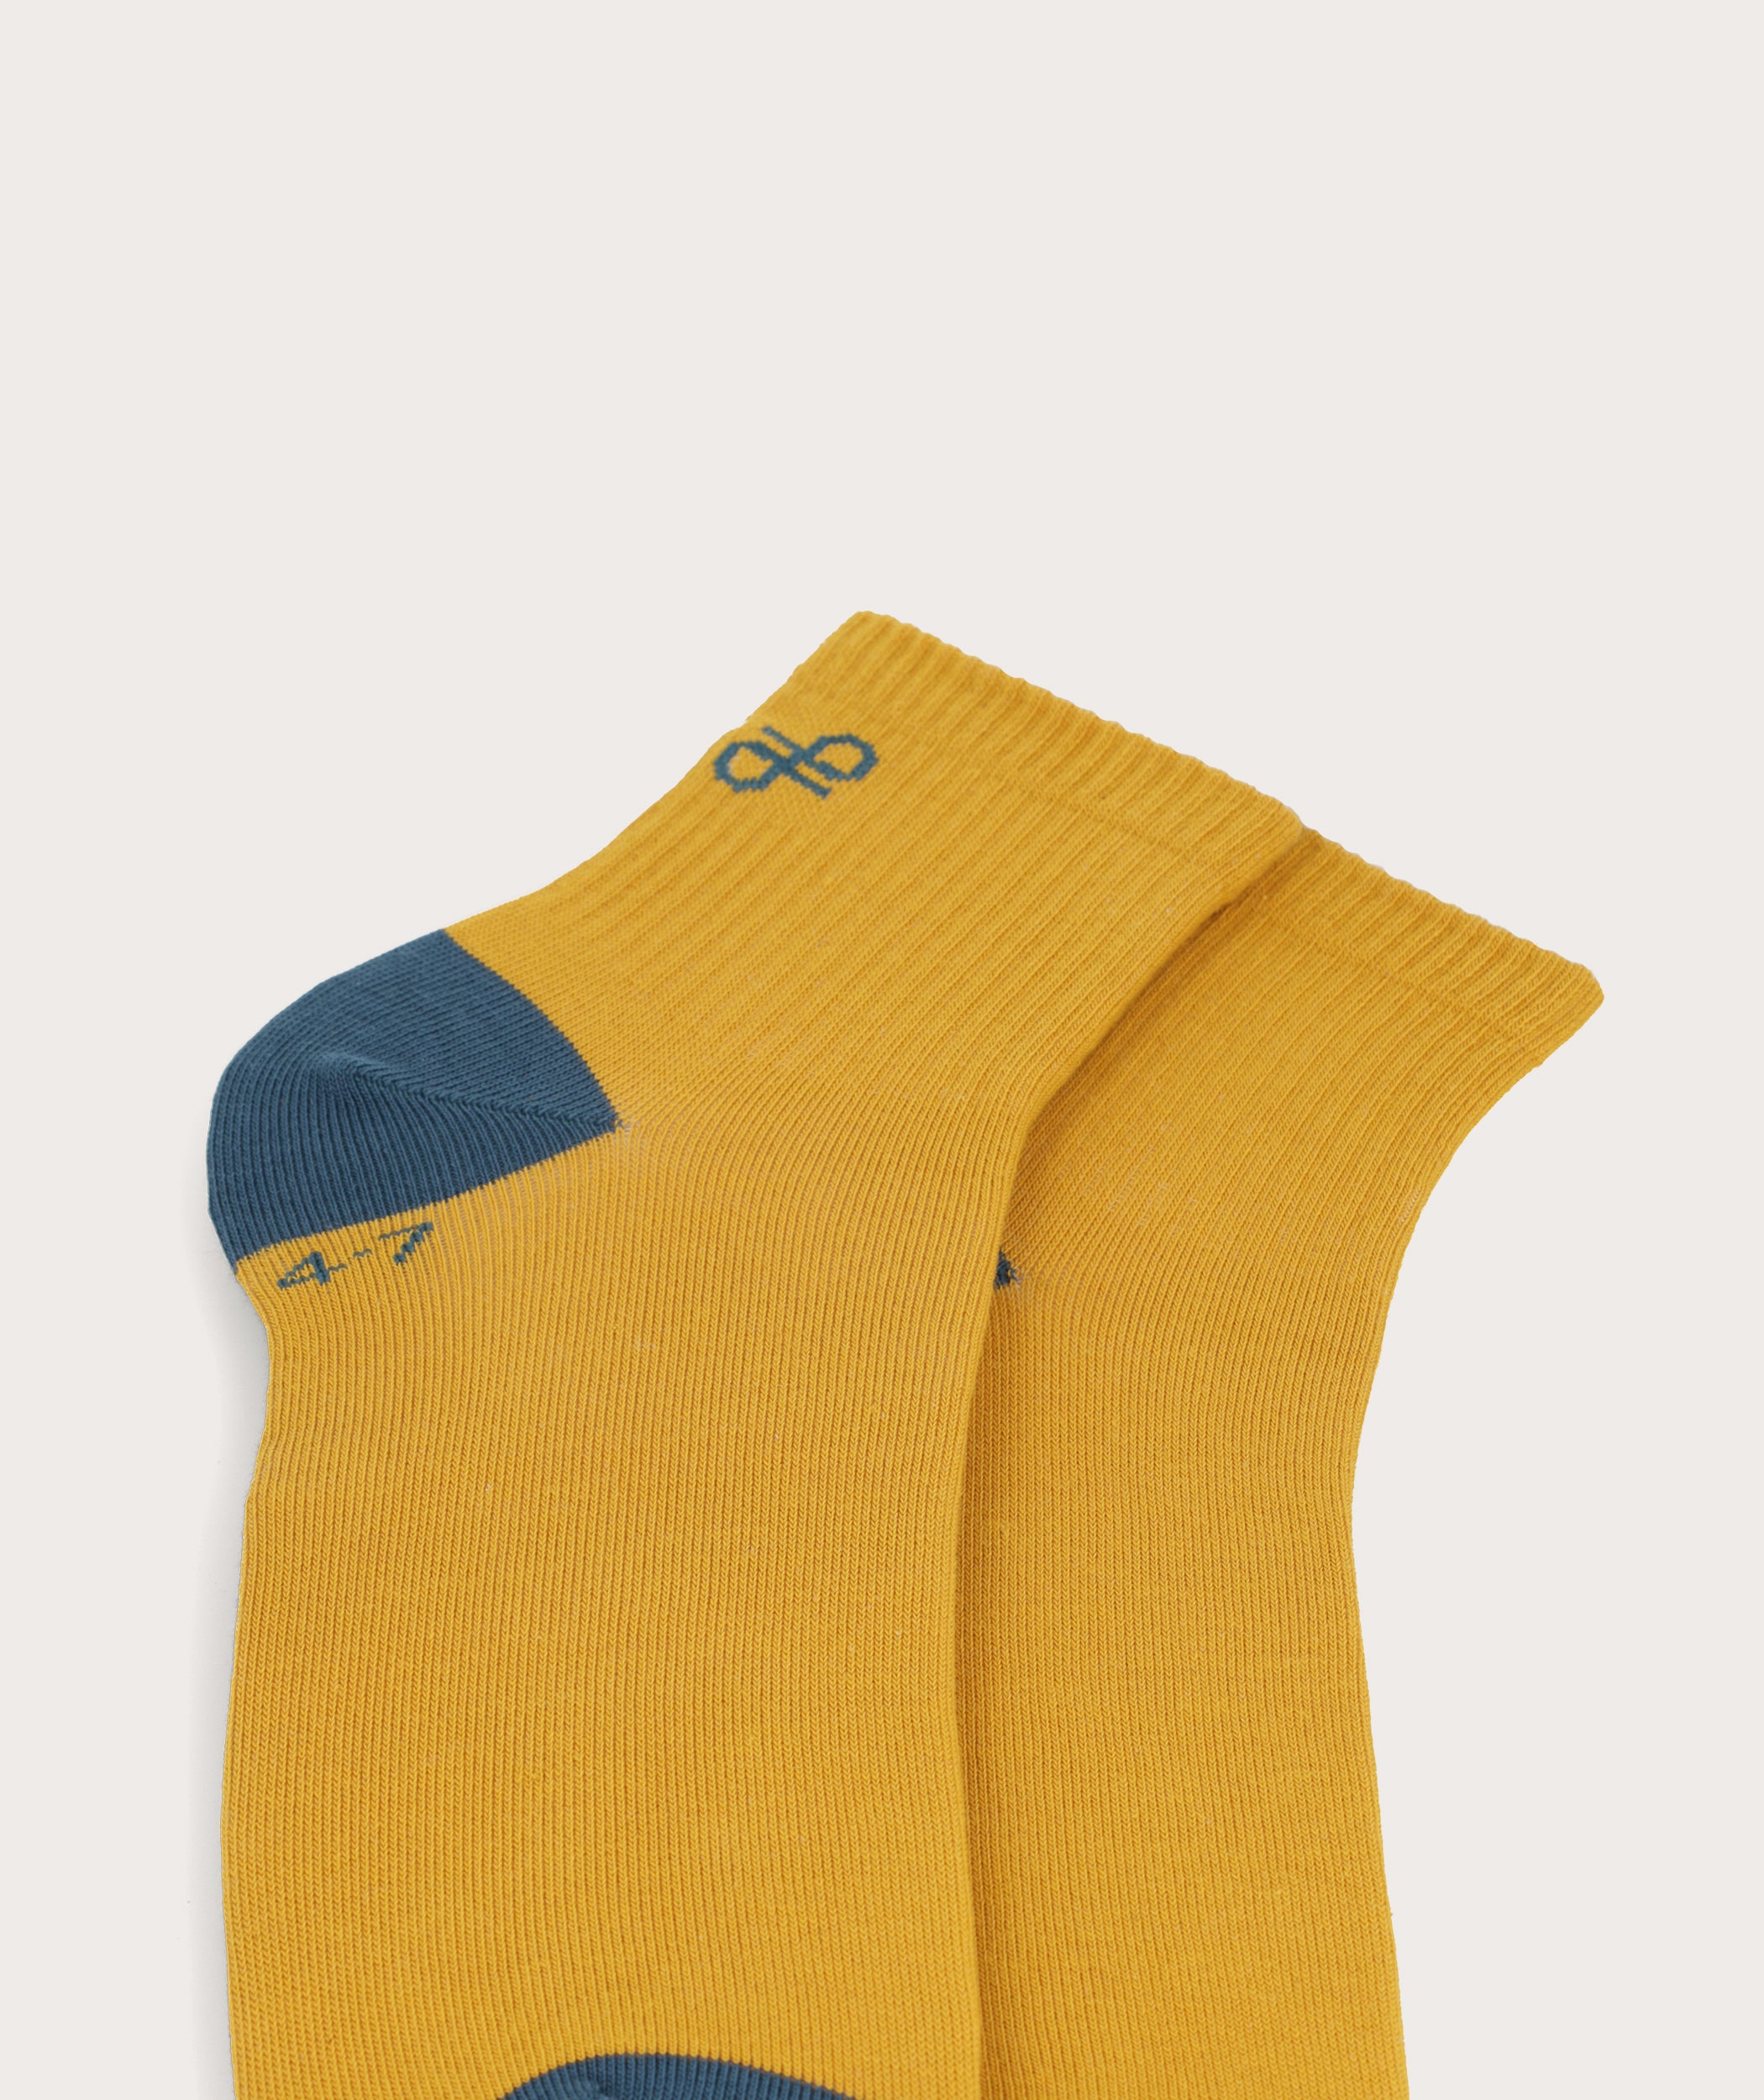 Socks FOM Active - Mustard & Airforce (Size 4-7)